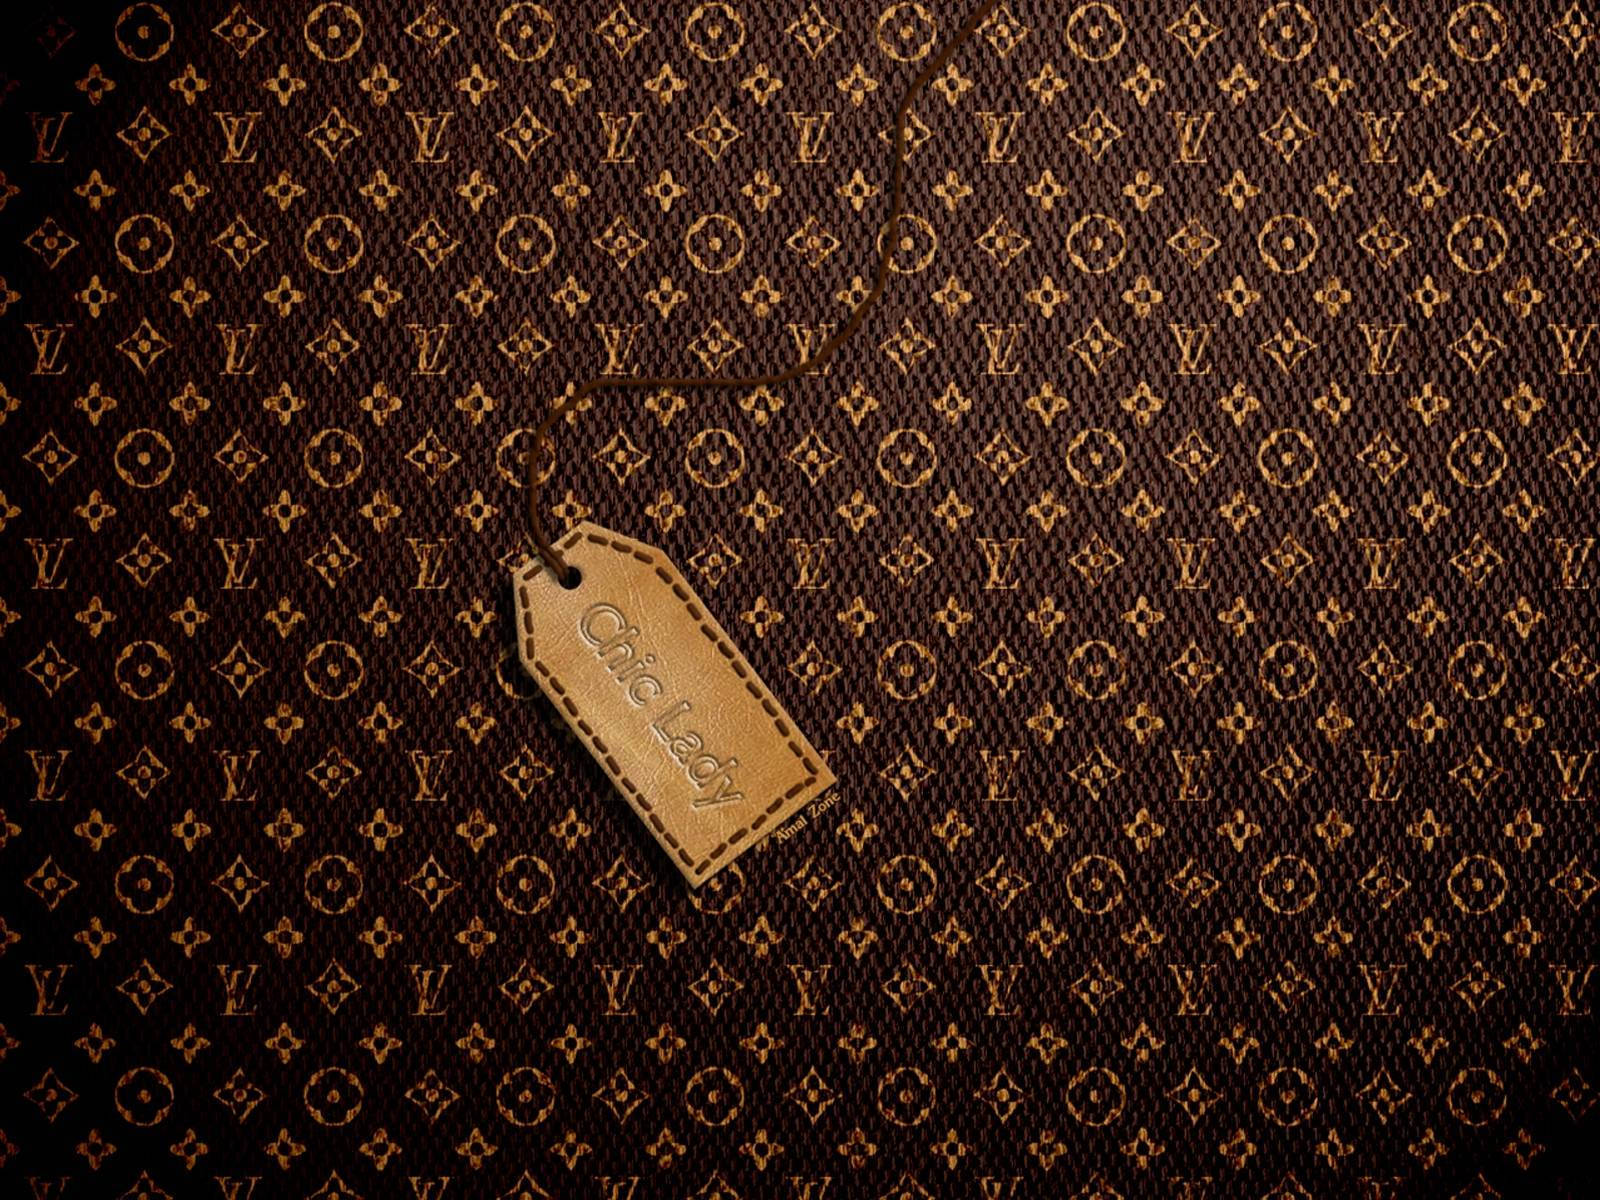 Download Glamorous And Chic - Taste The Elegance Of Louis Vuitton Aesthetic  Wallpaper